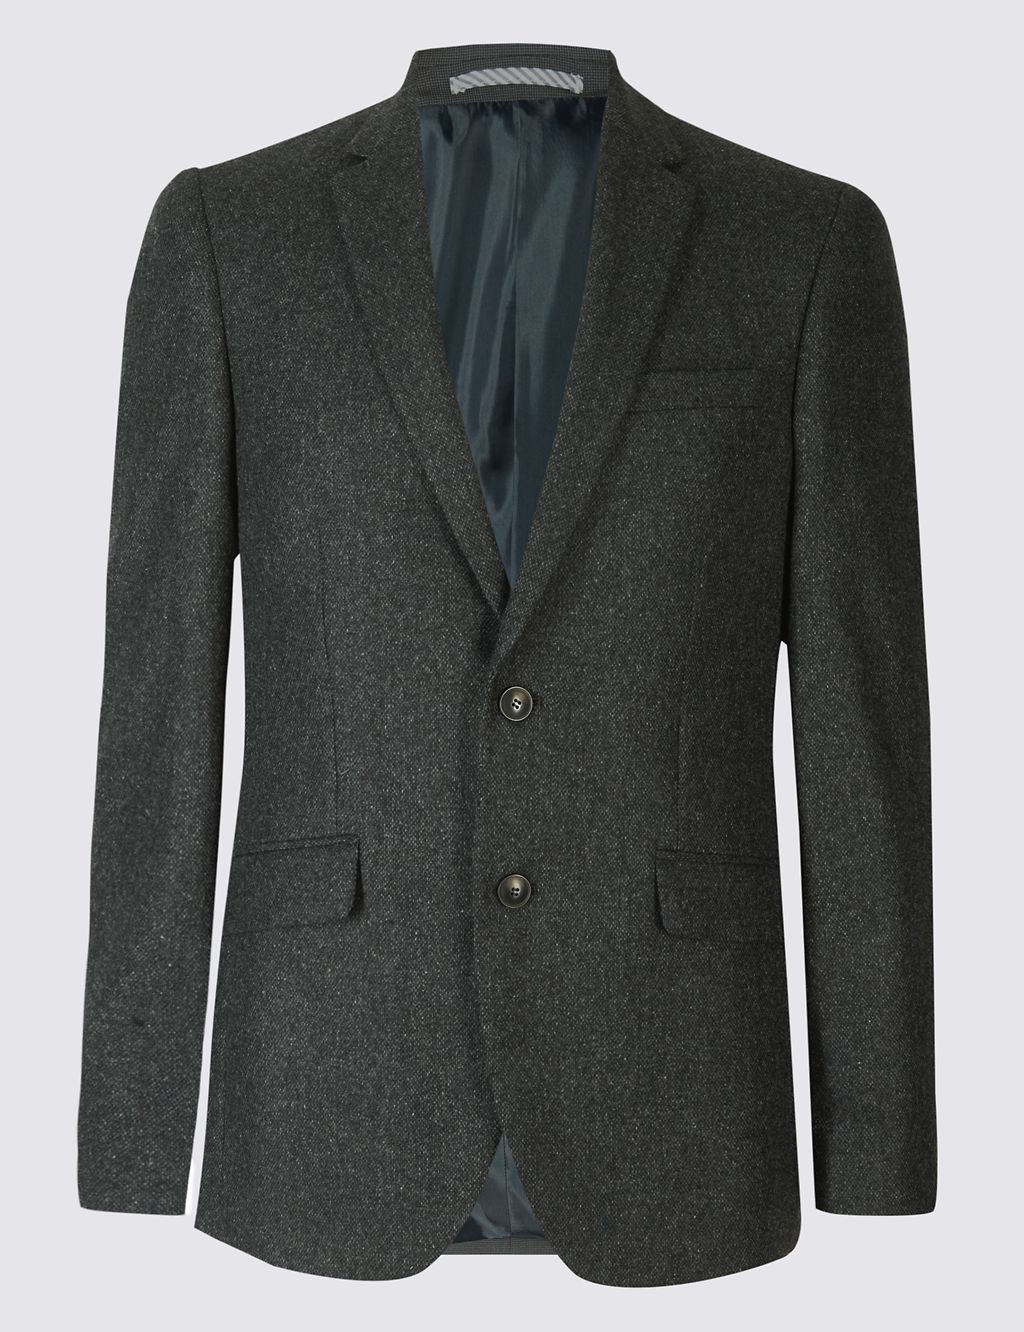 Charcoal Wool Blend Jacket with Italian Fabric 1 of 9